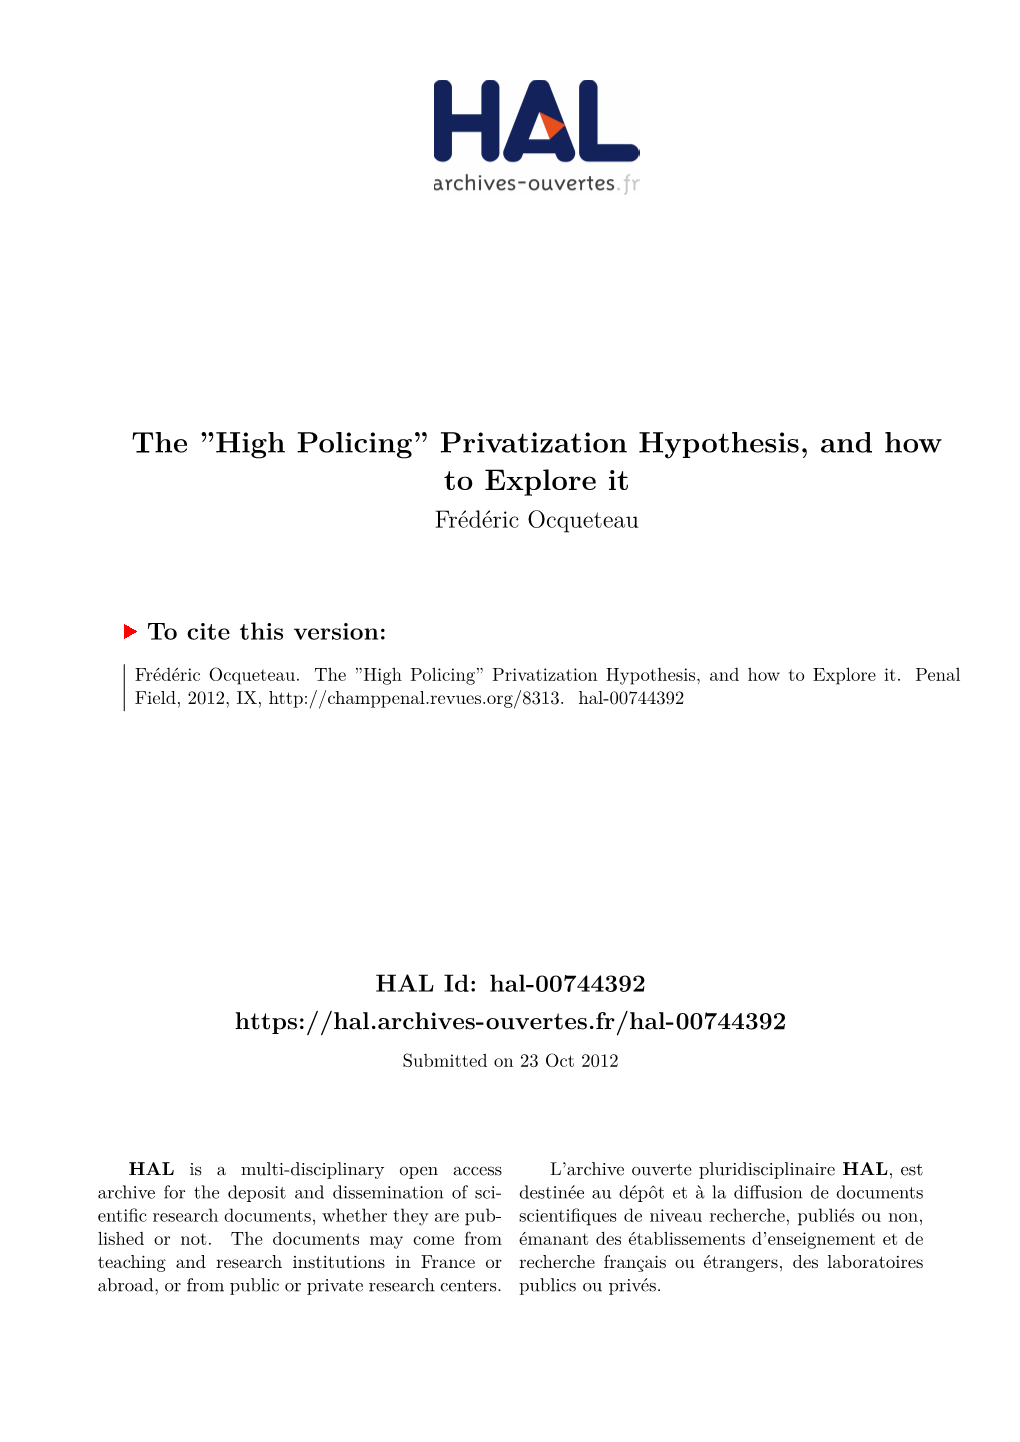 High Policing” Privatization Hypothesis, and How to Explore It Frédéric Ocqueteau